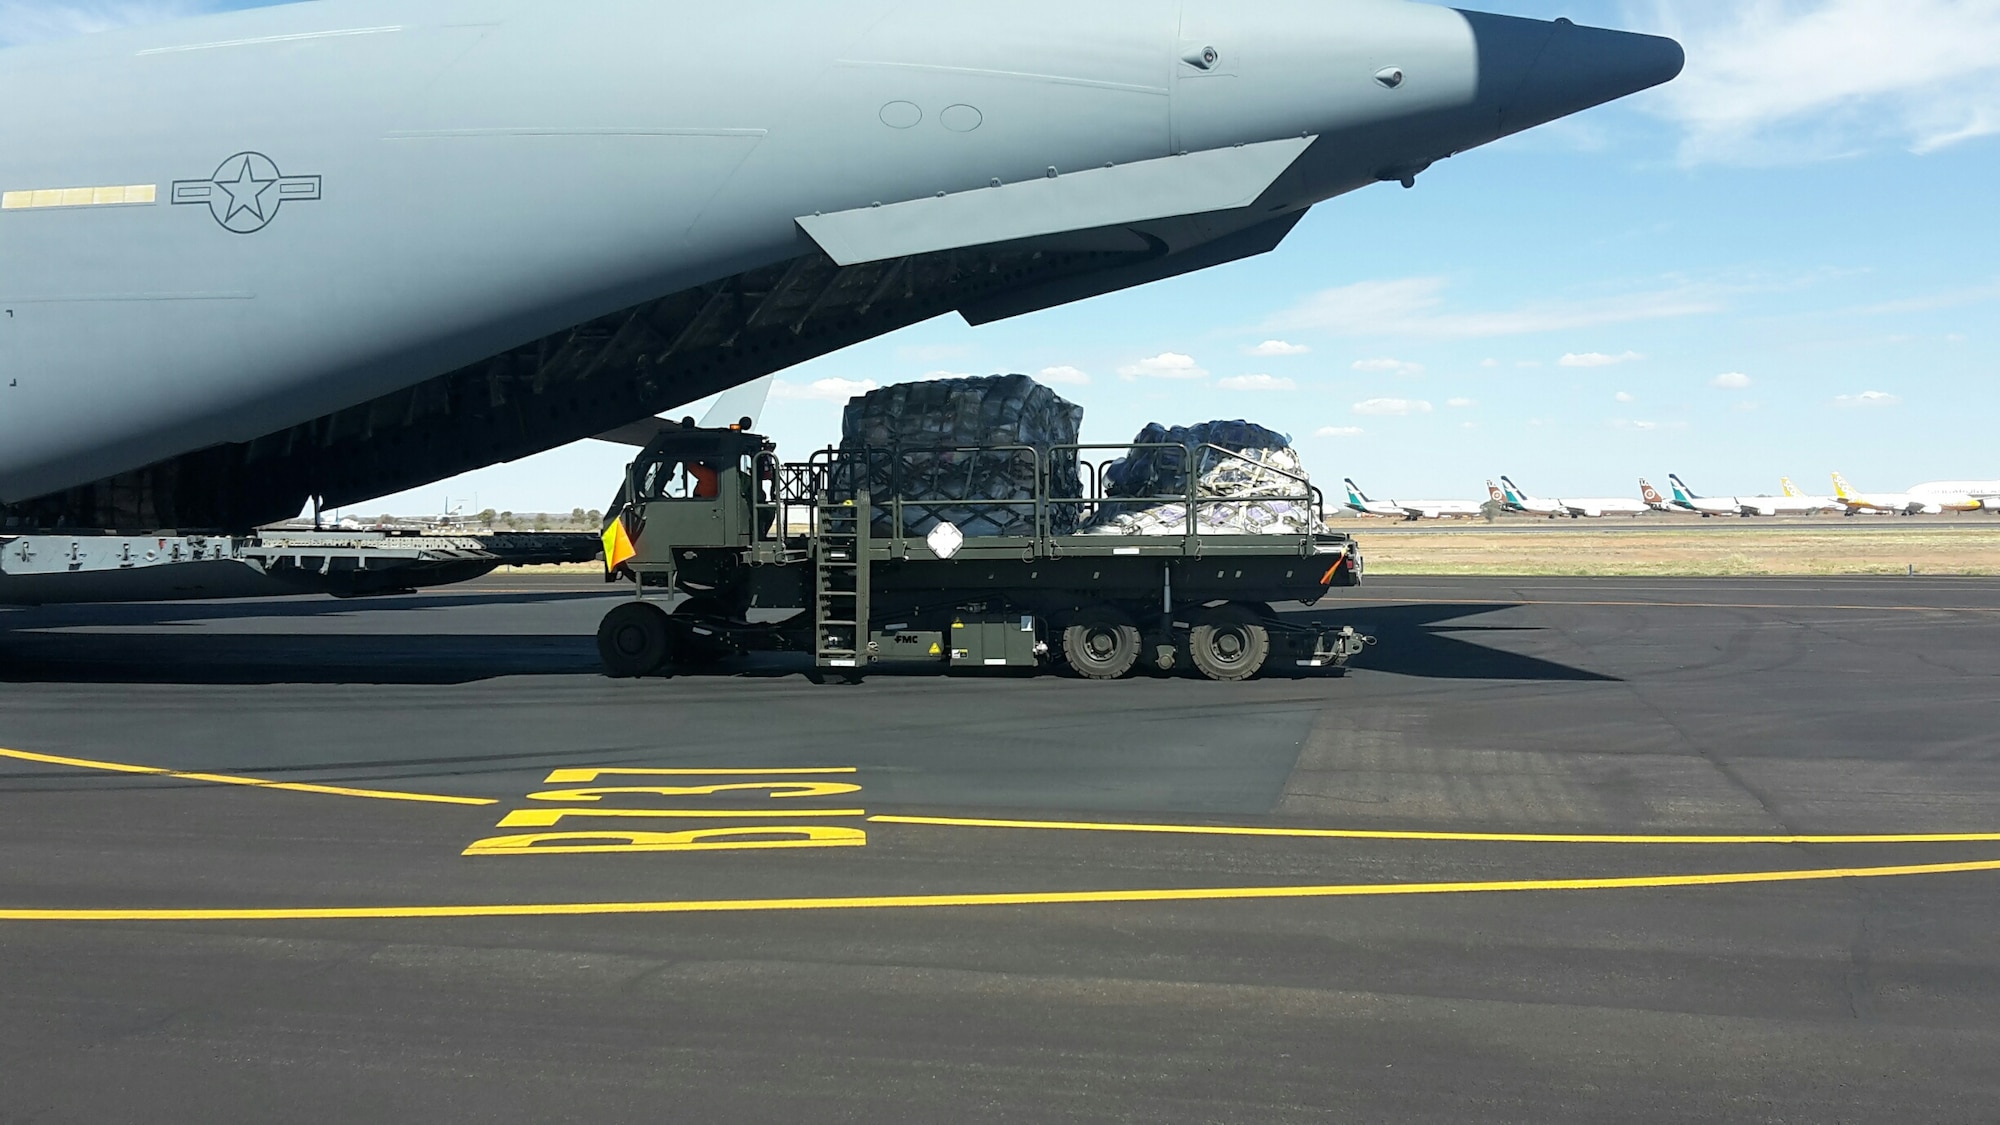 Palletized mail is unloaded off of a C-17 Globemaster III at Alice Springs, Australia, April 28, 2020. The Pacific Air Forces Air Postal Squadron partnered with the U.S. Army, U.S. Air Force Air Mobility Command as well as the U.S. Navy to deliver thousands of pounds of mail to Republic of Korea, Japan, and Australia. (Courtesy Photo)